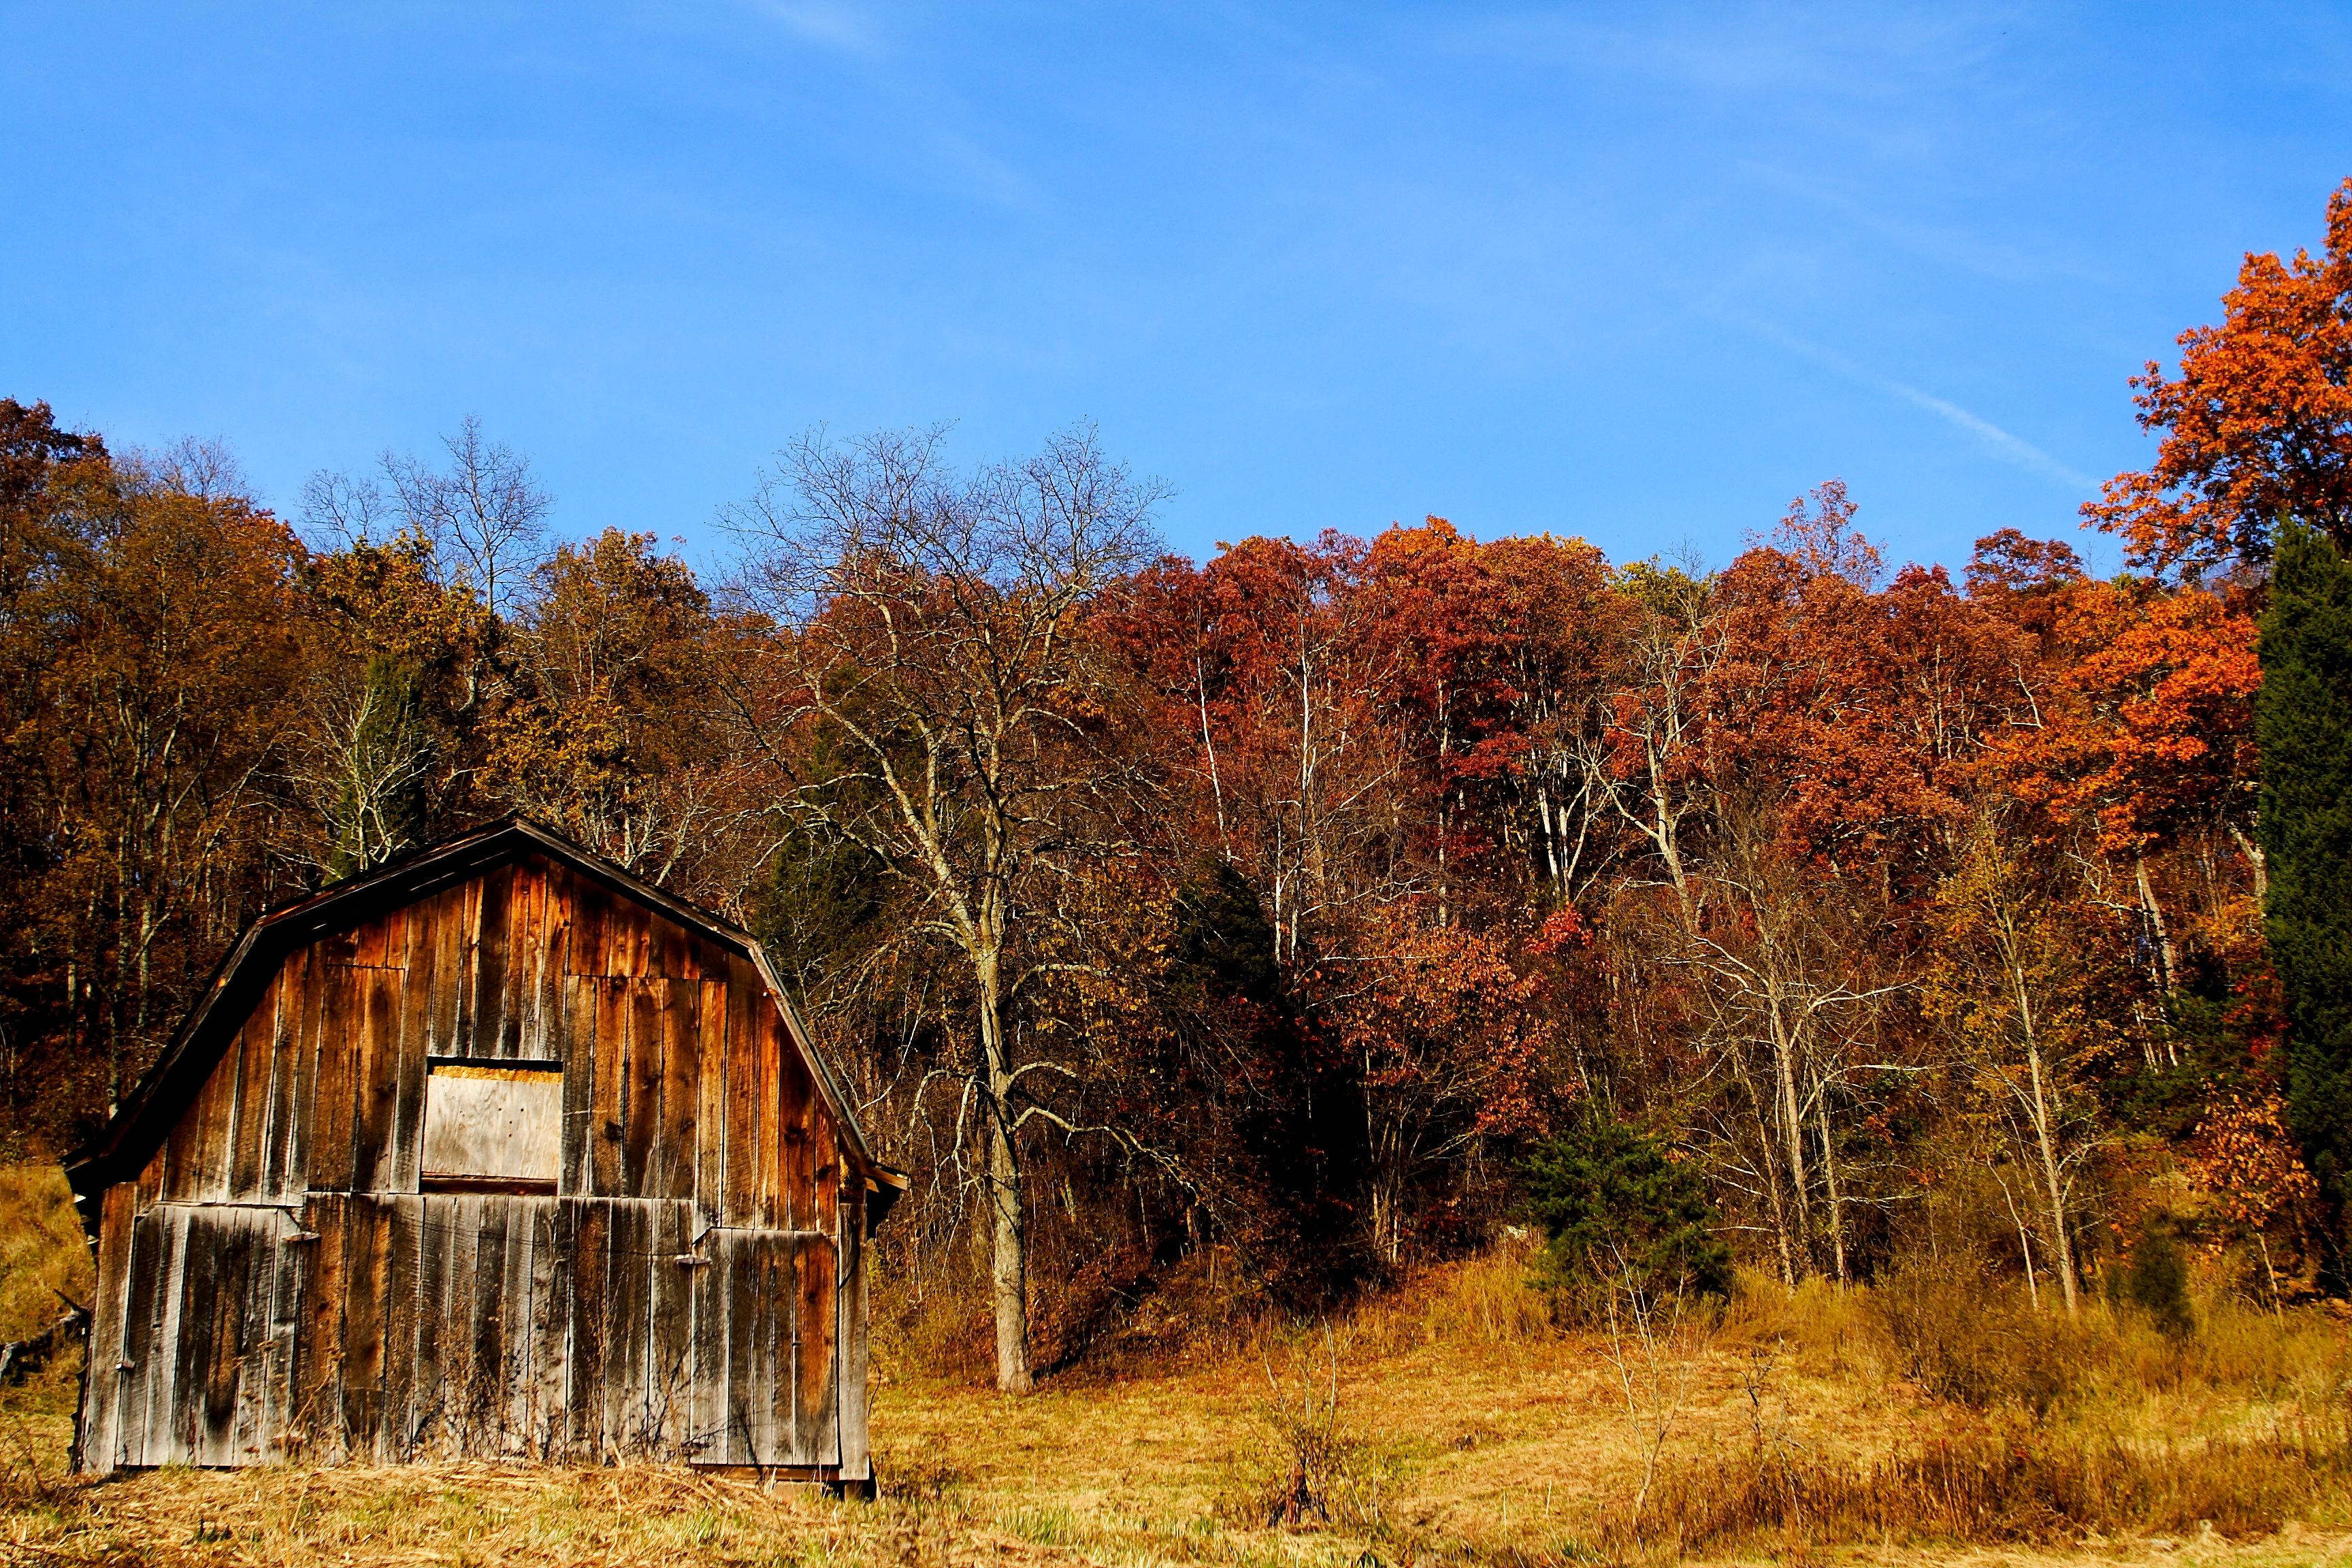 Autumn Country Barn Fall Leaves Sky Structures Nature Pictures